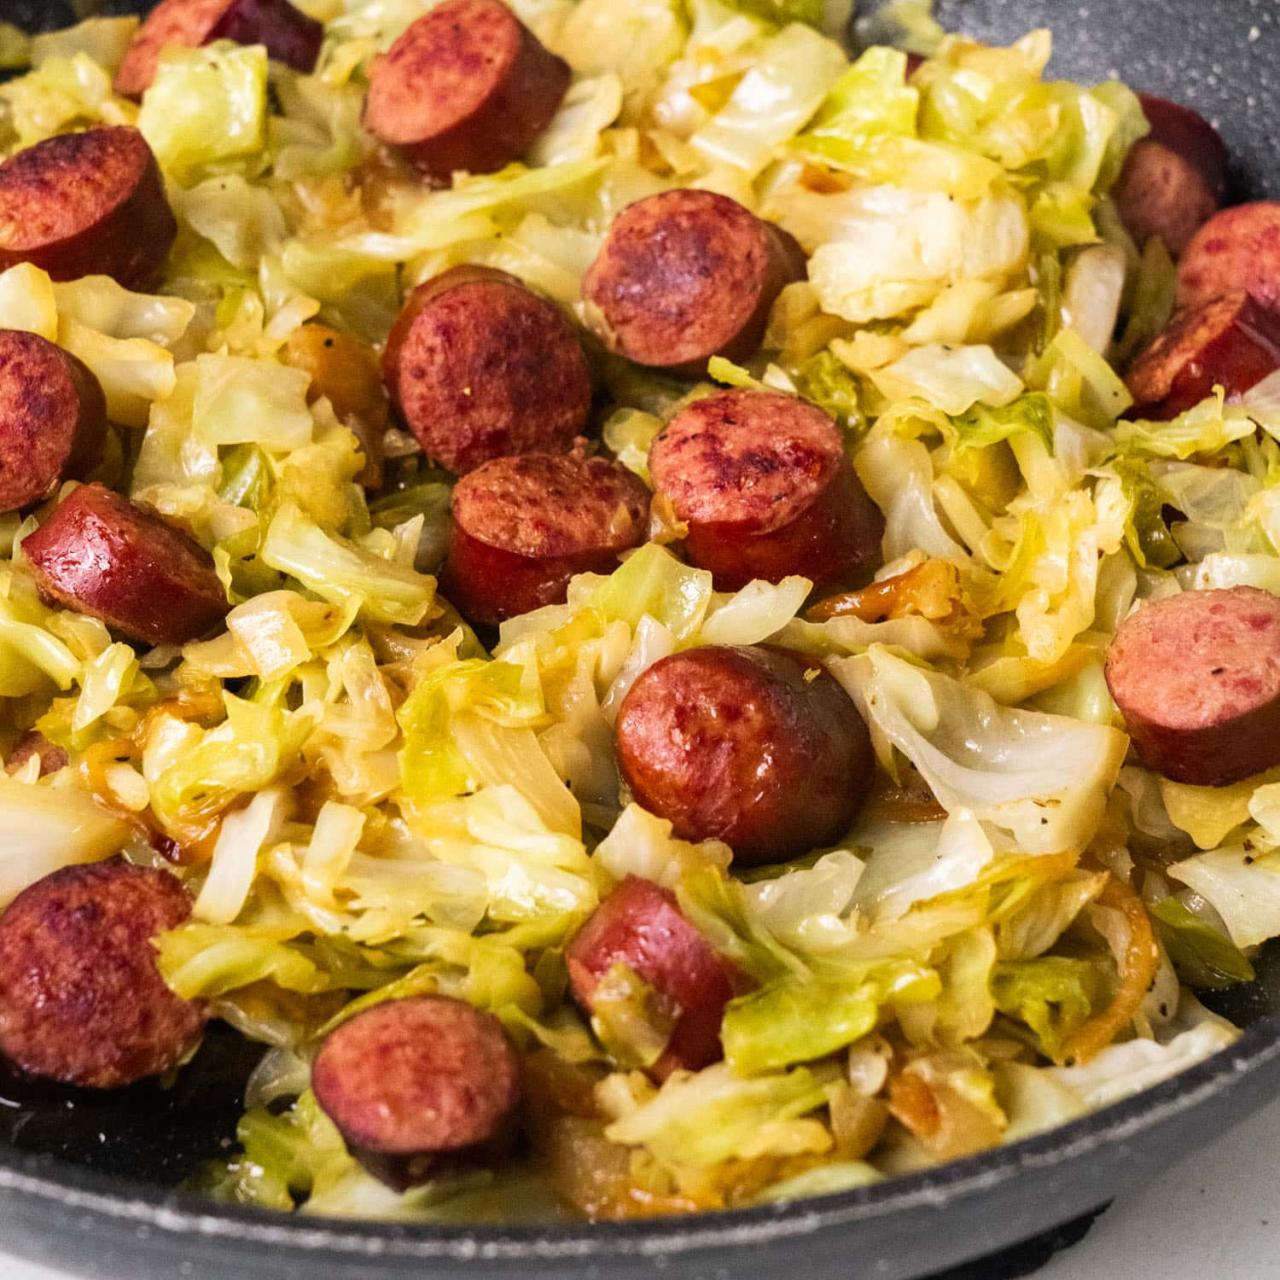 Fried Cabbage With Sausage - Brooklyn Farm Girl